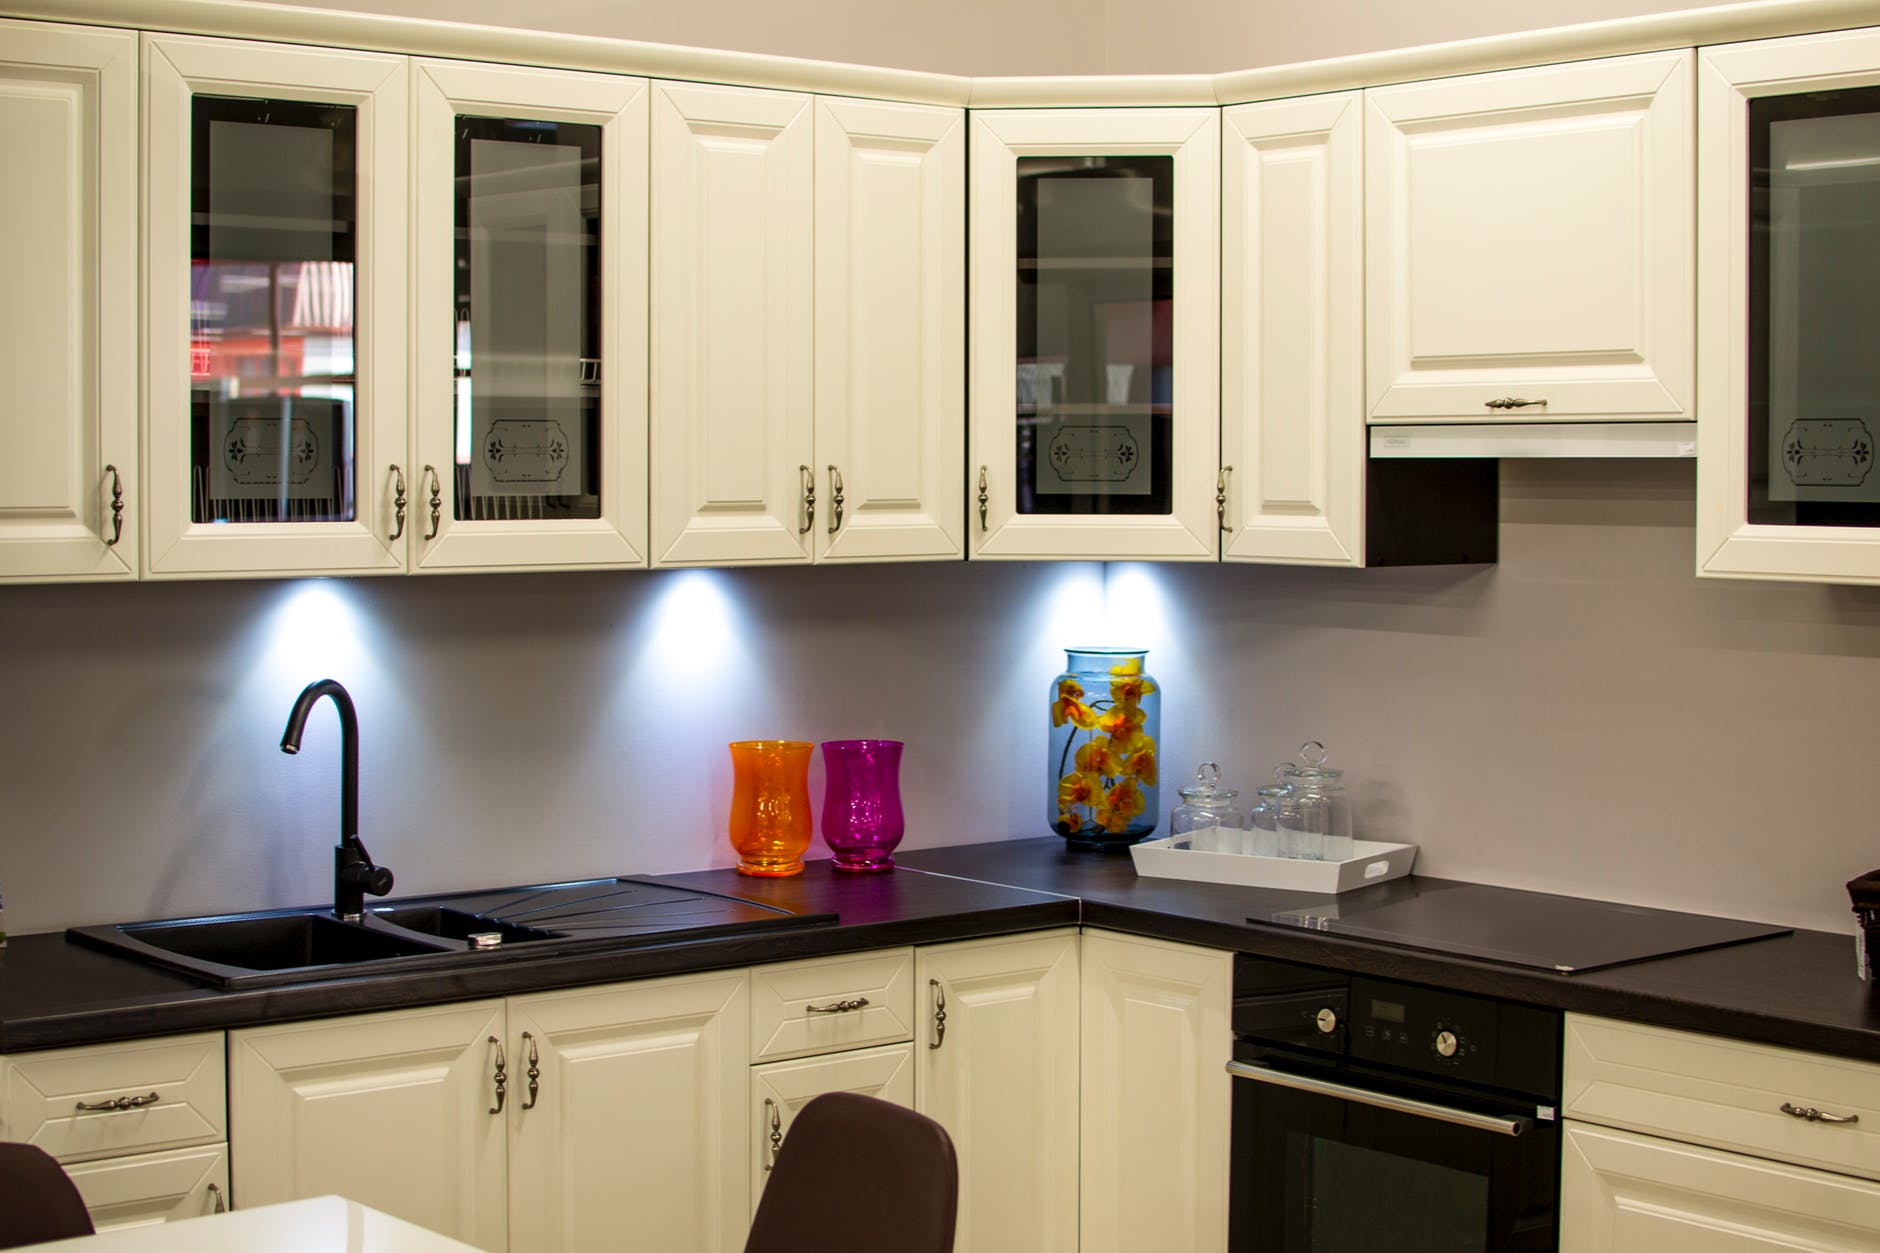 3 Low Budget Ways to Update the Kitchen in Your Las Vegas Rental Property